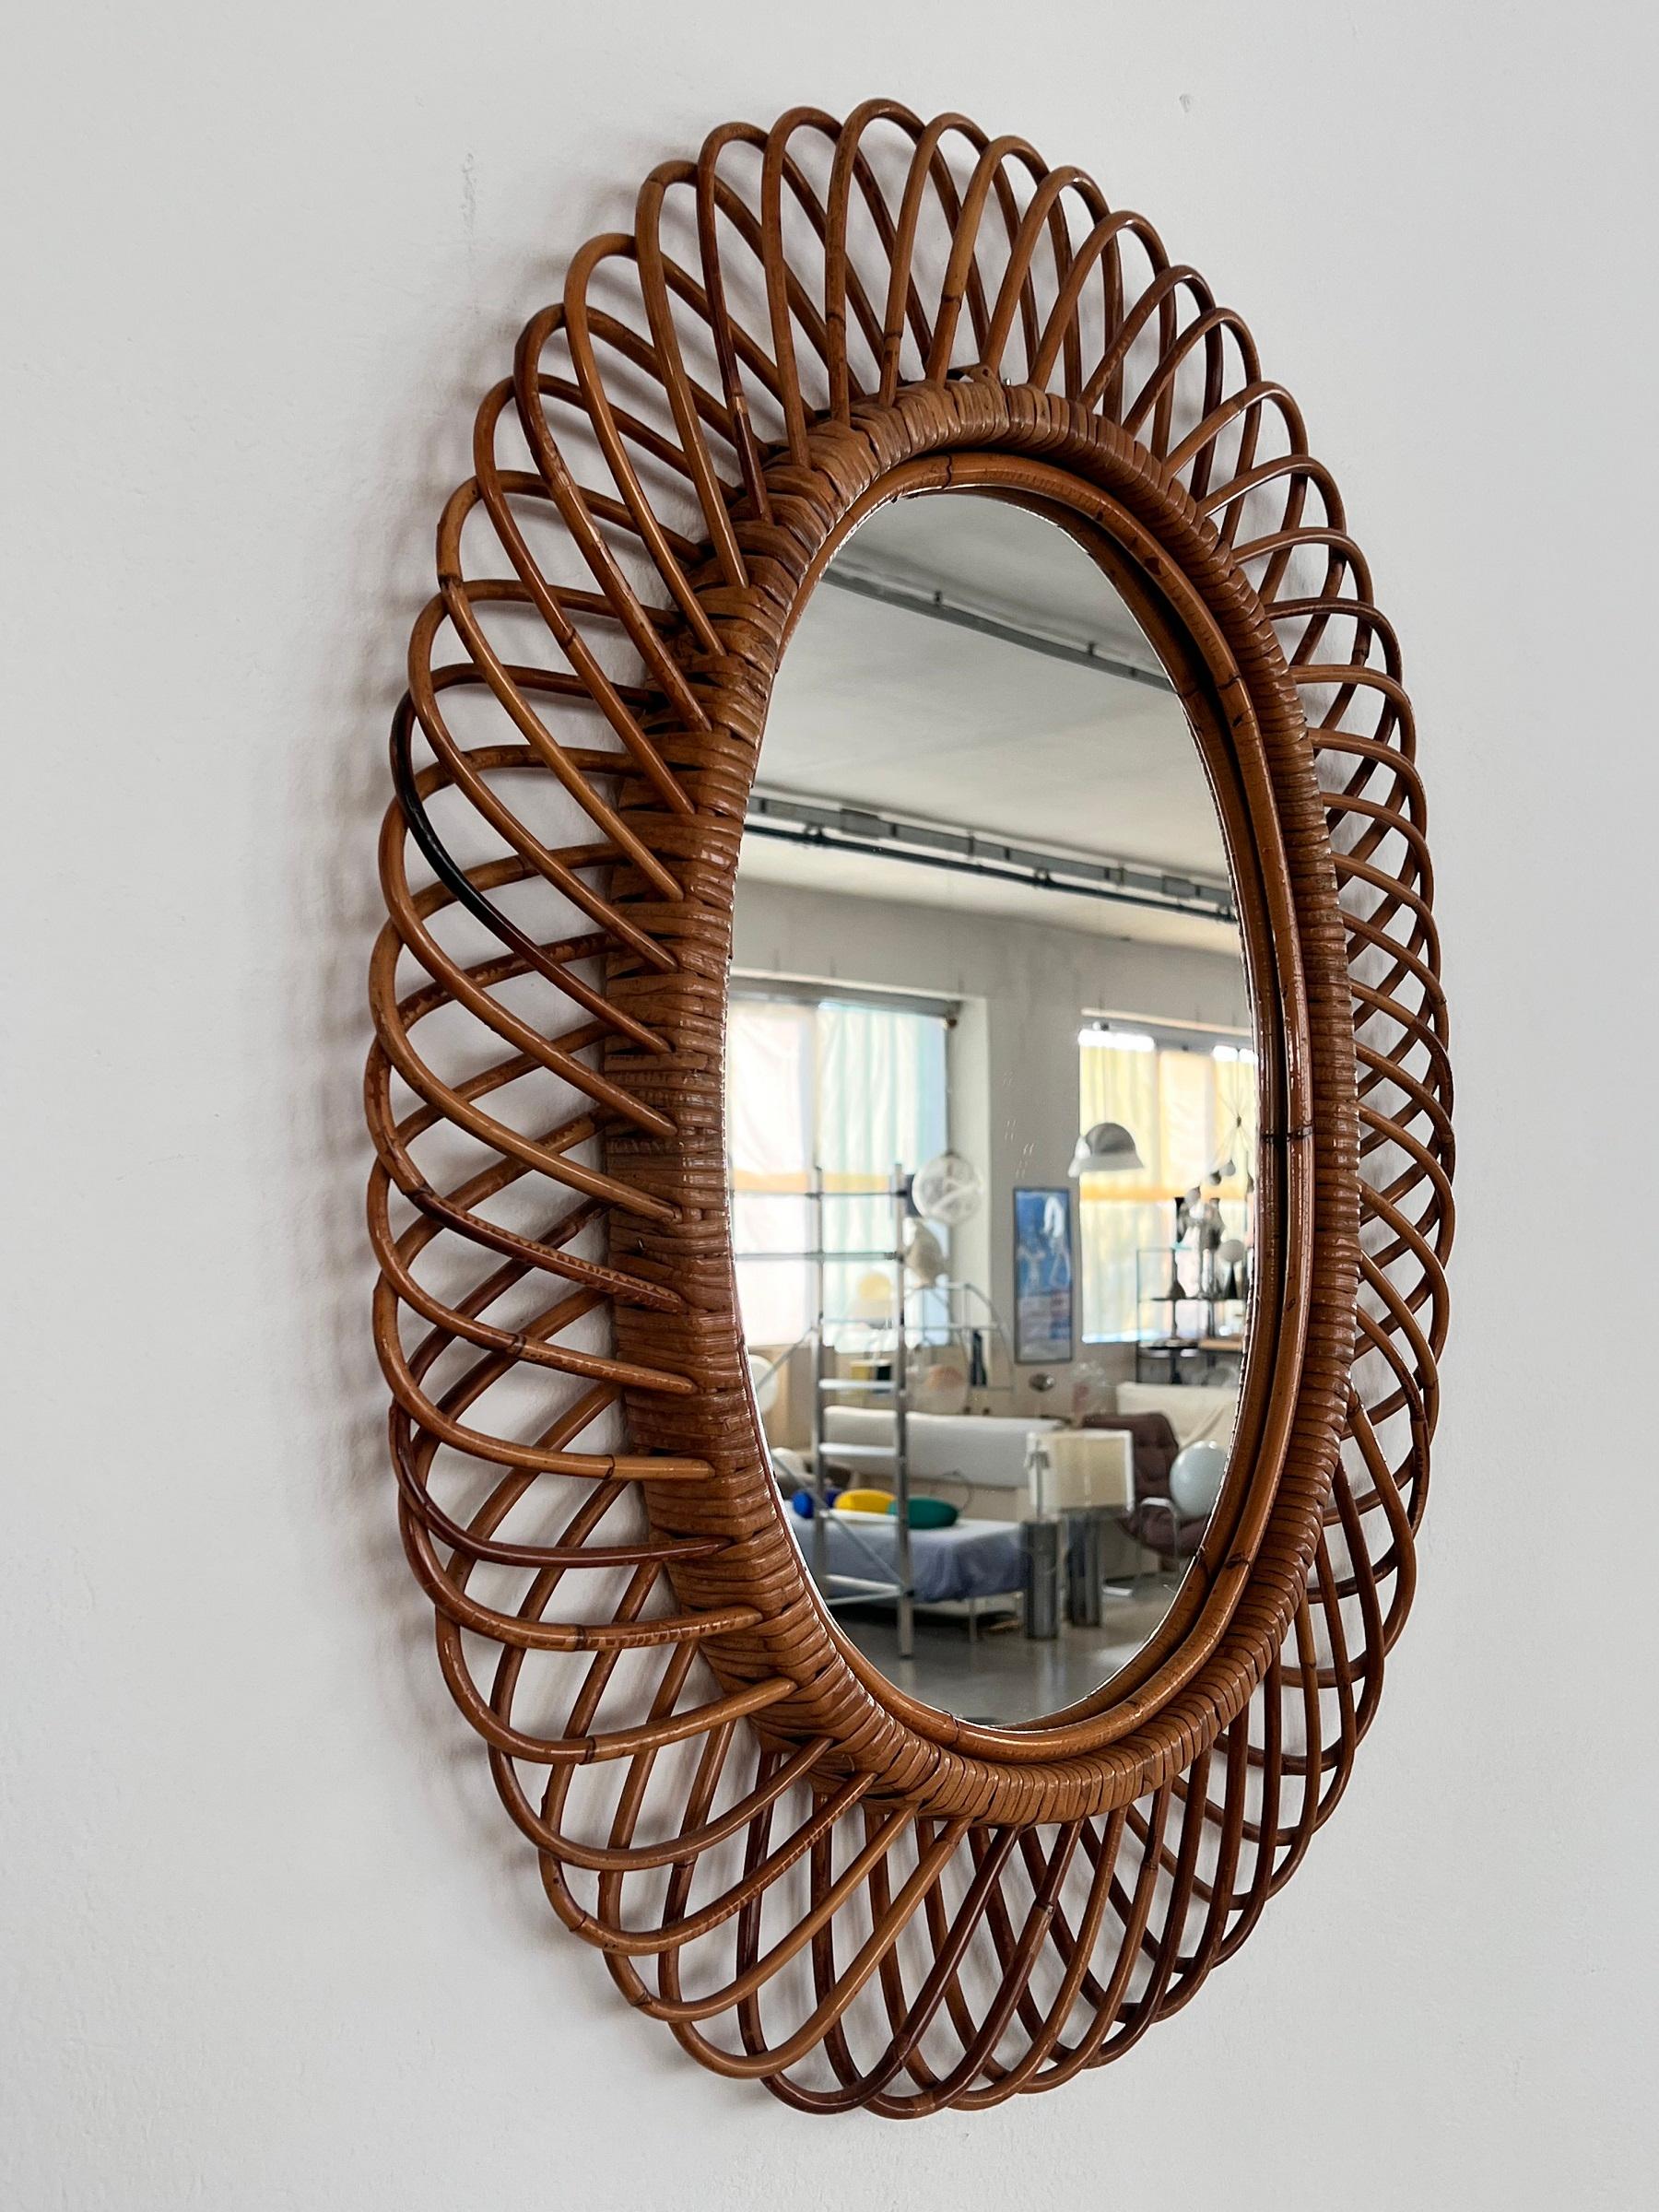 Italian Midcentury Oval Wall Mirror With Bamboo Frame Franco Albini Style, 1960s For Sale 3